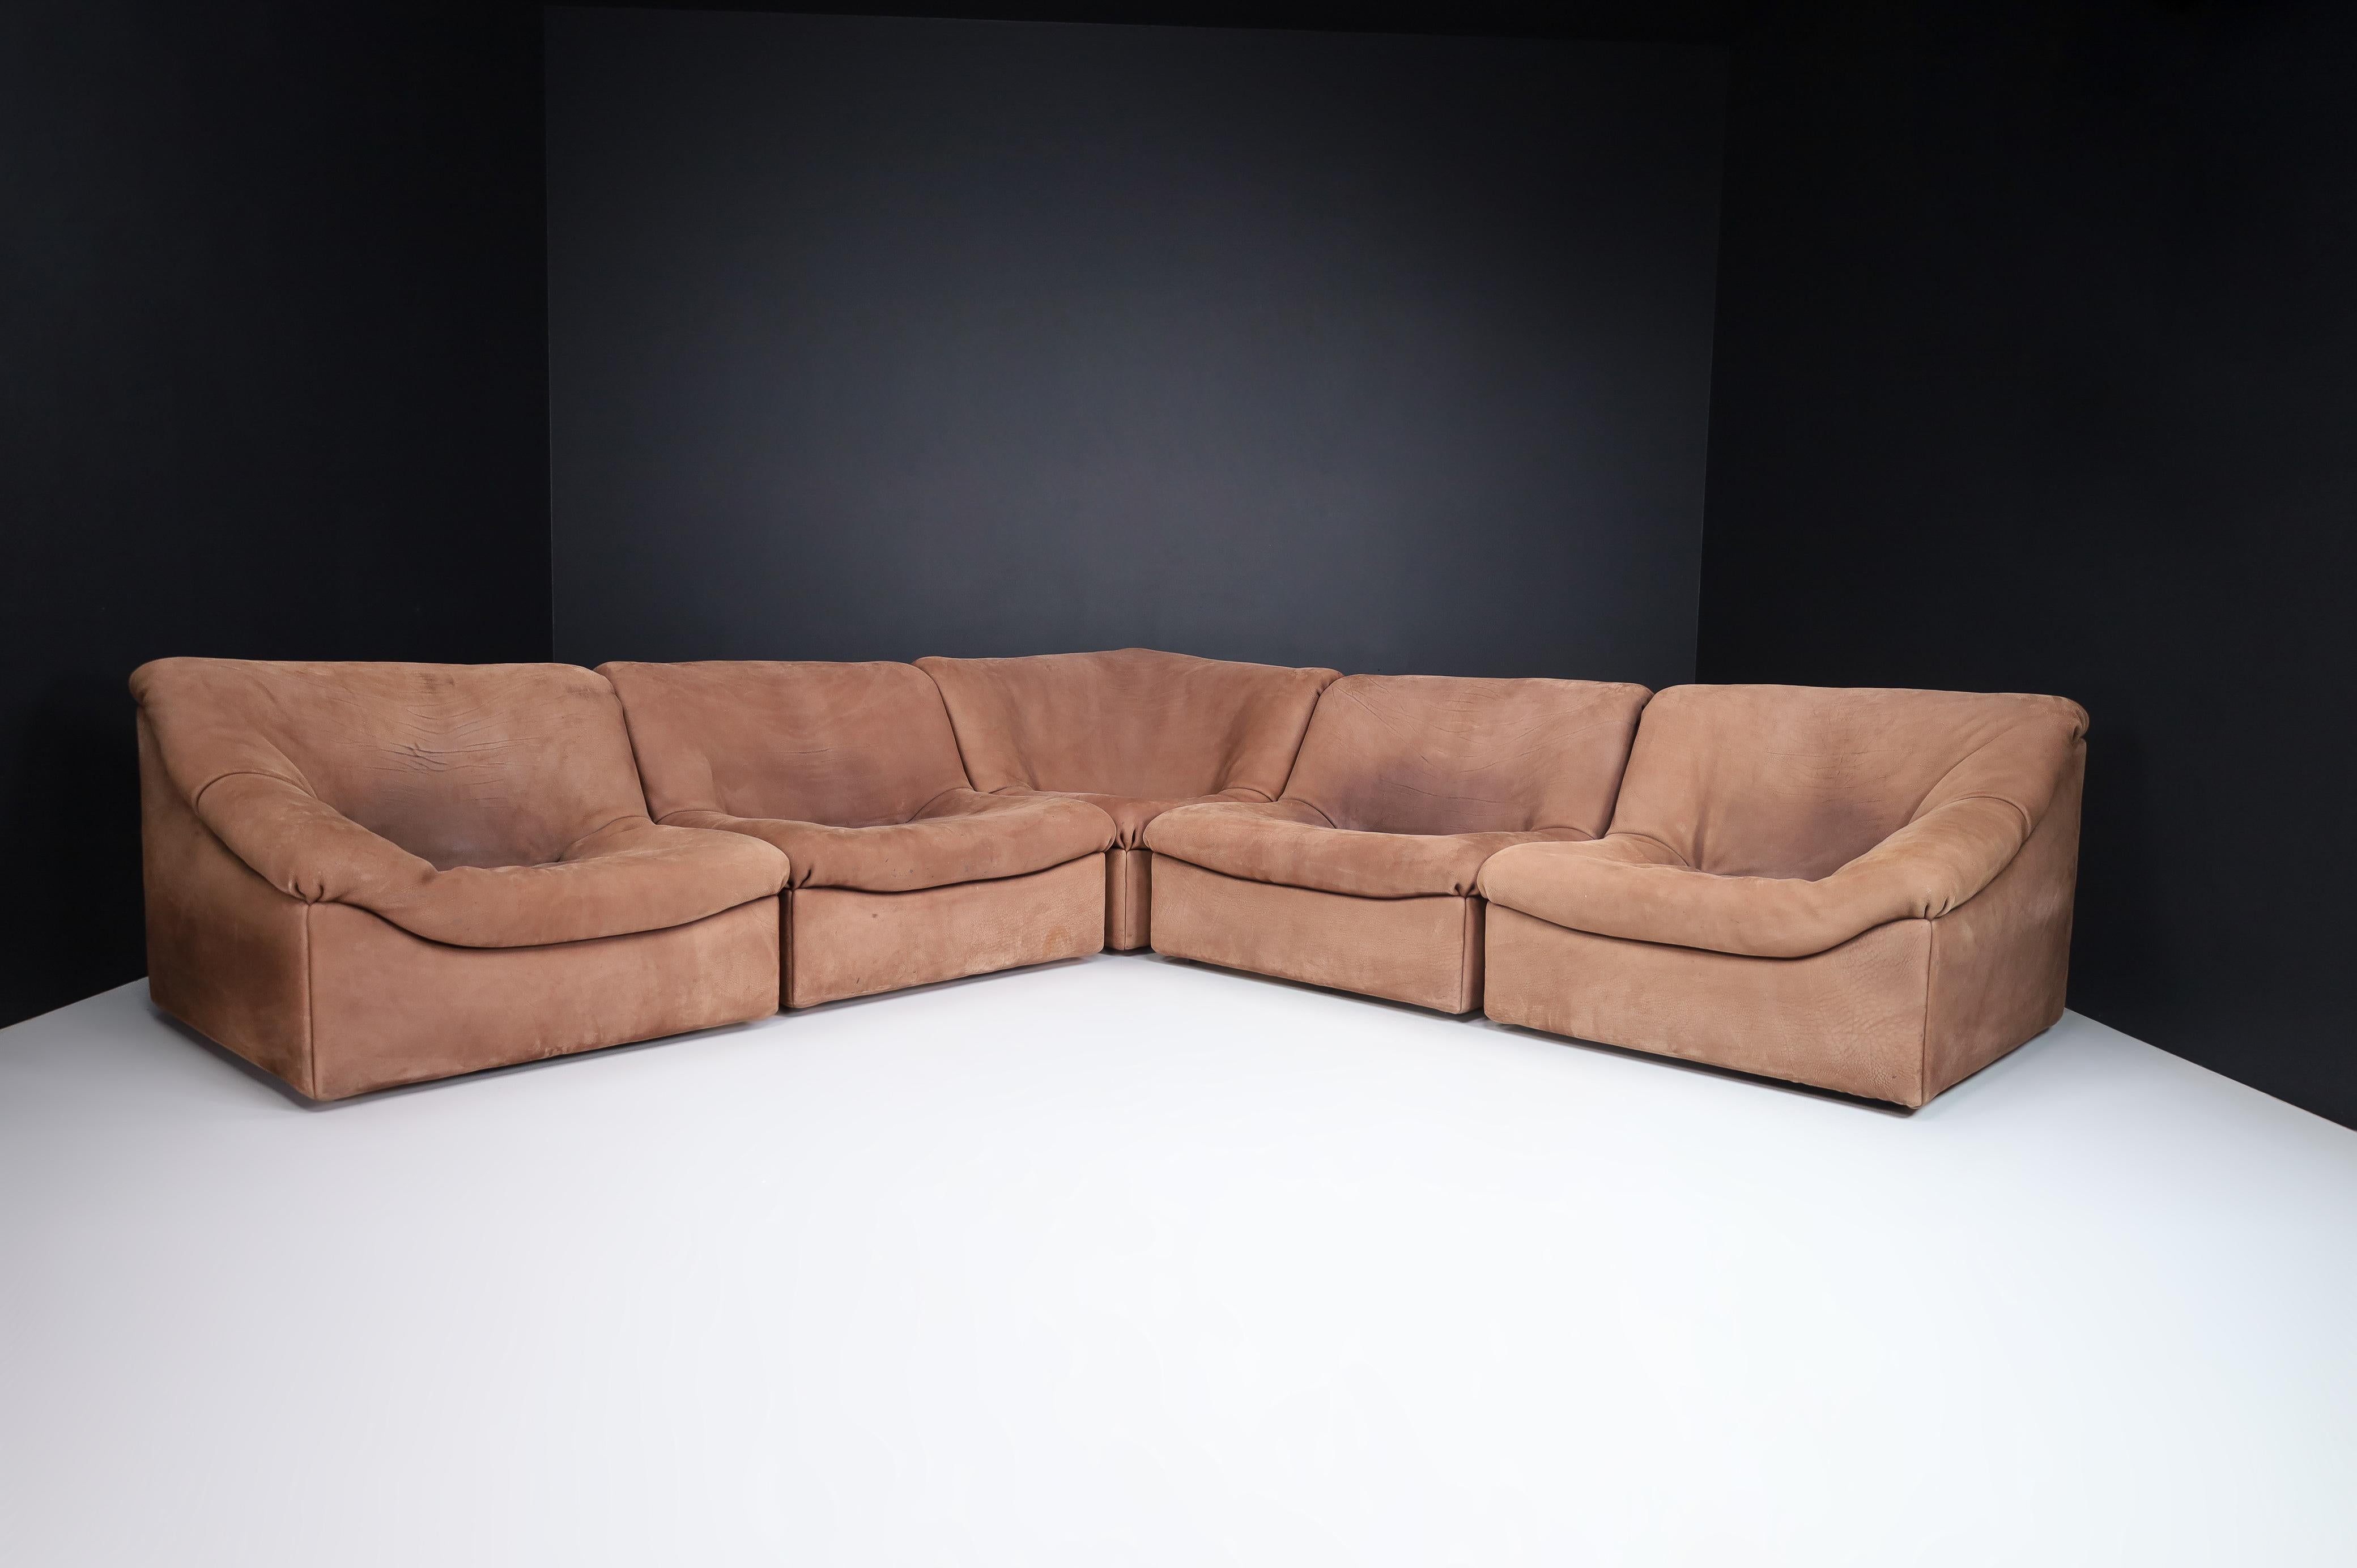 De Sede DS46 Sectional Sofa-Livingroomset in Buffalo Leather, Switzerland 1970s For Sale 9